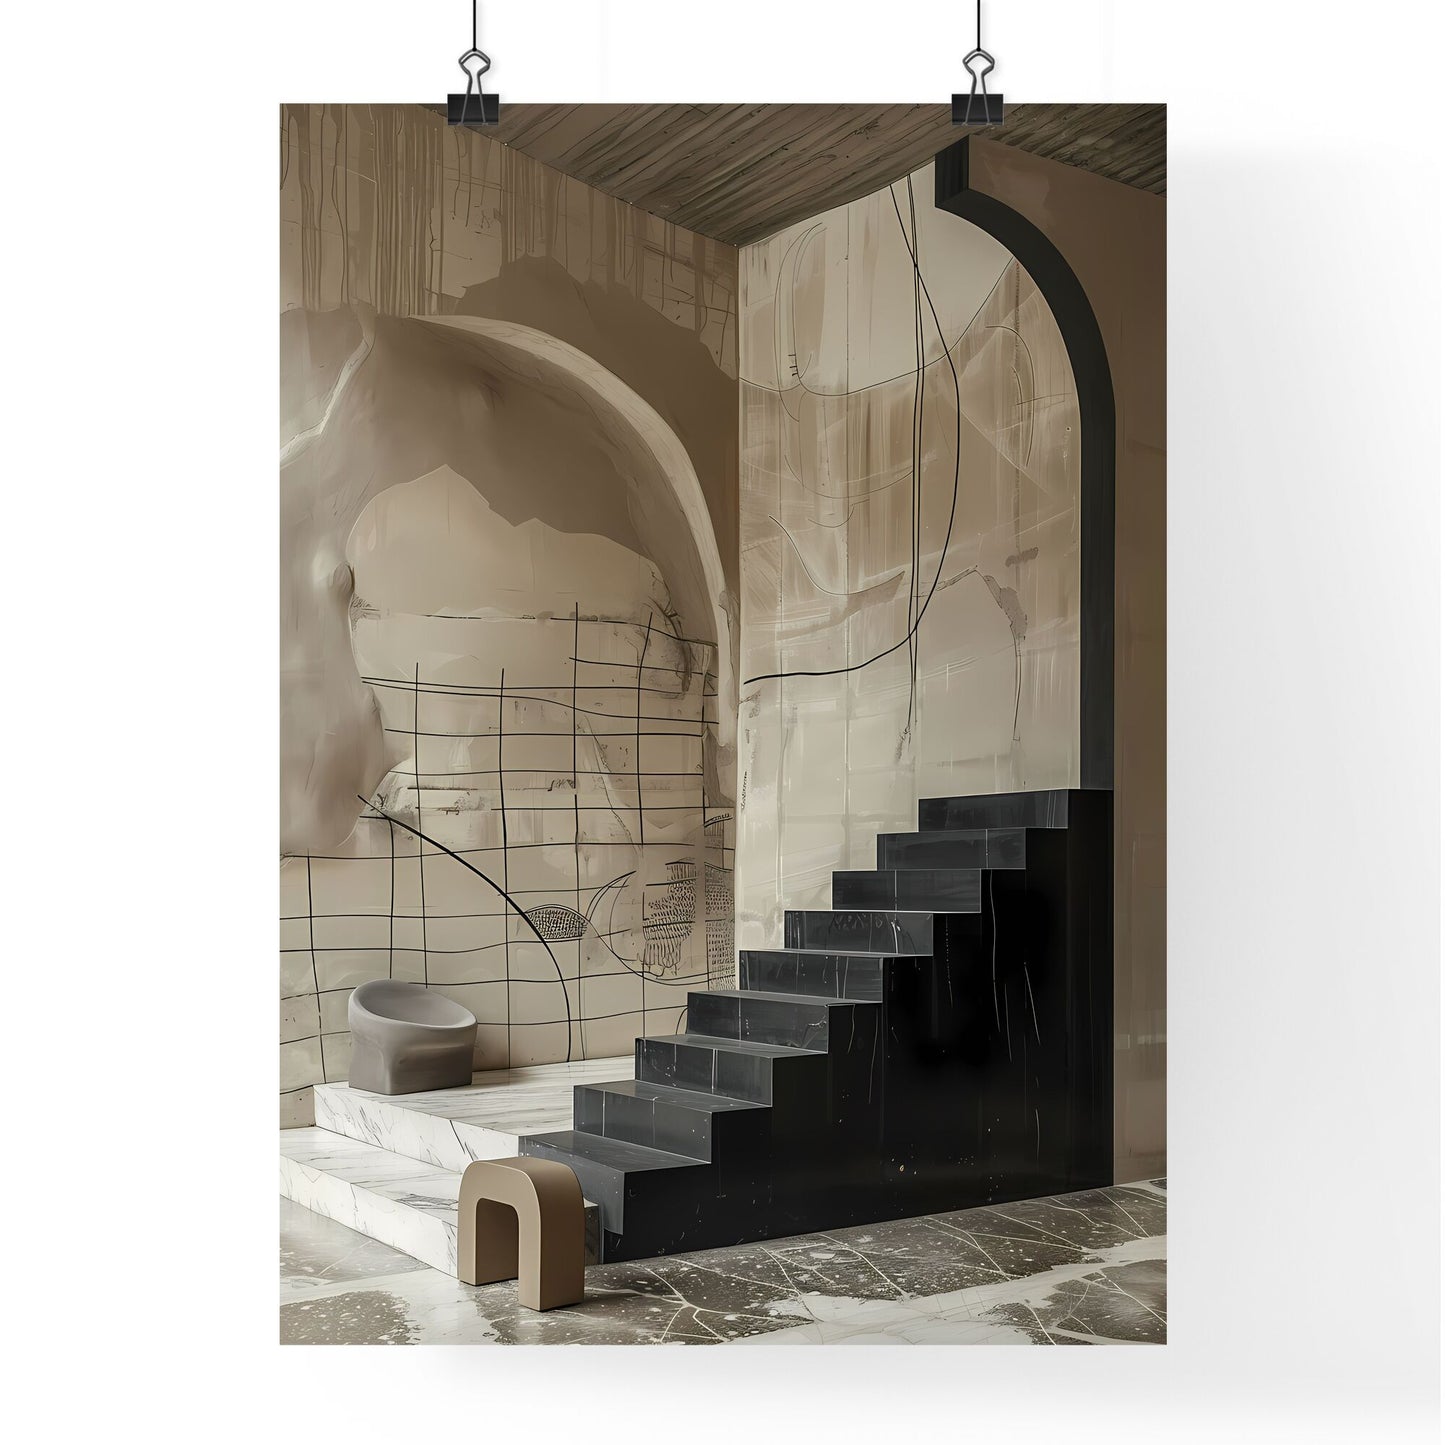 Textured Black and White Abstract Staircase Painting with Curvilinear Forms and Serene Simplicity Default Title